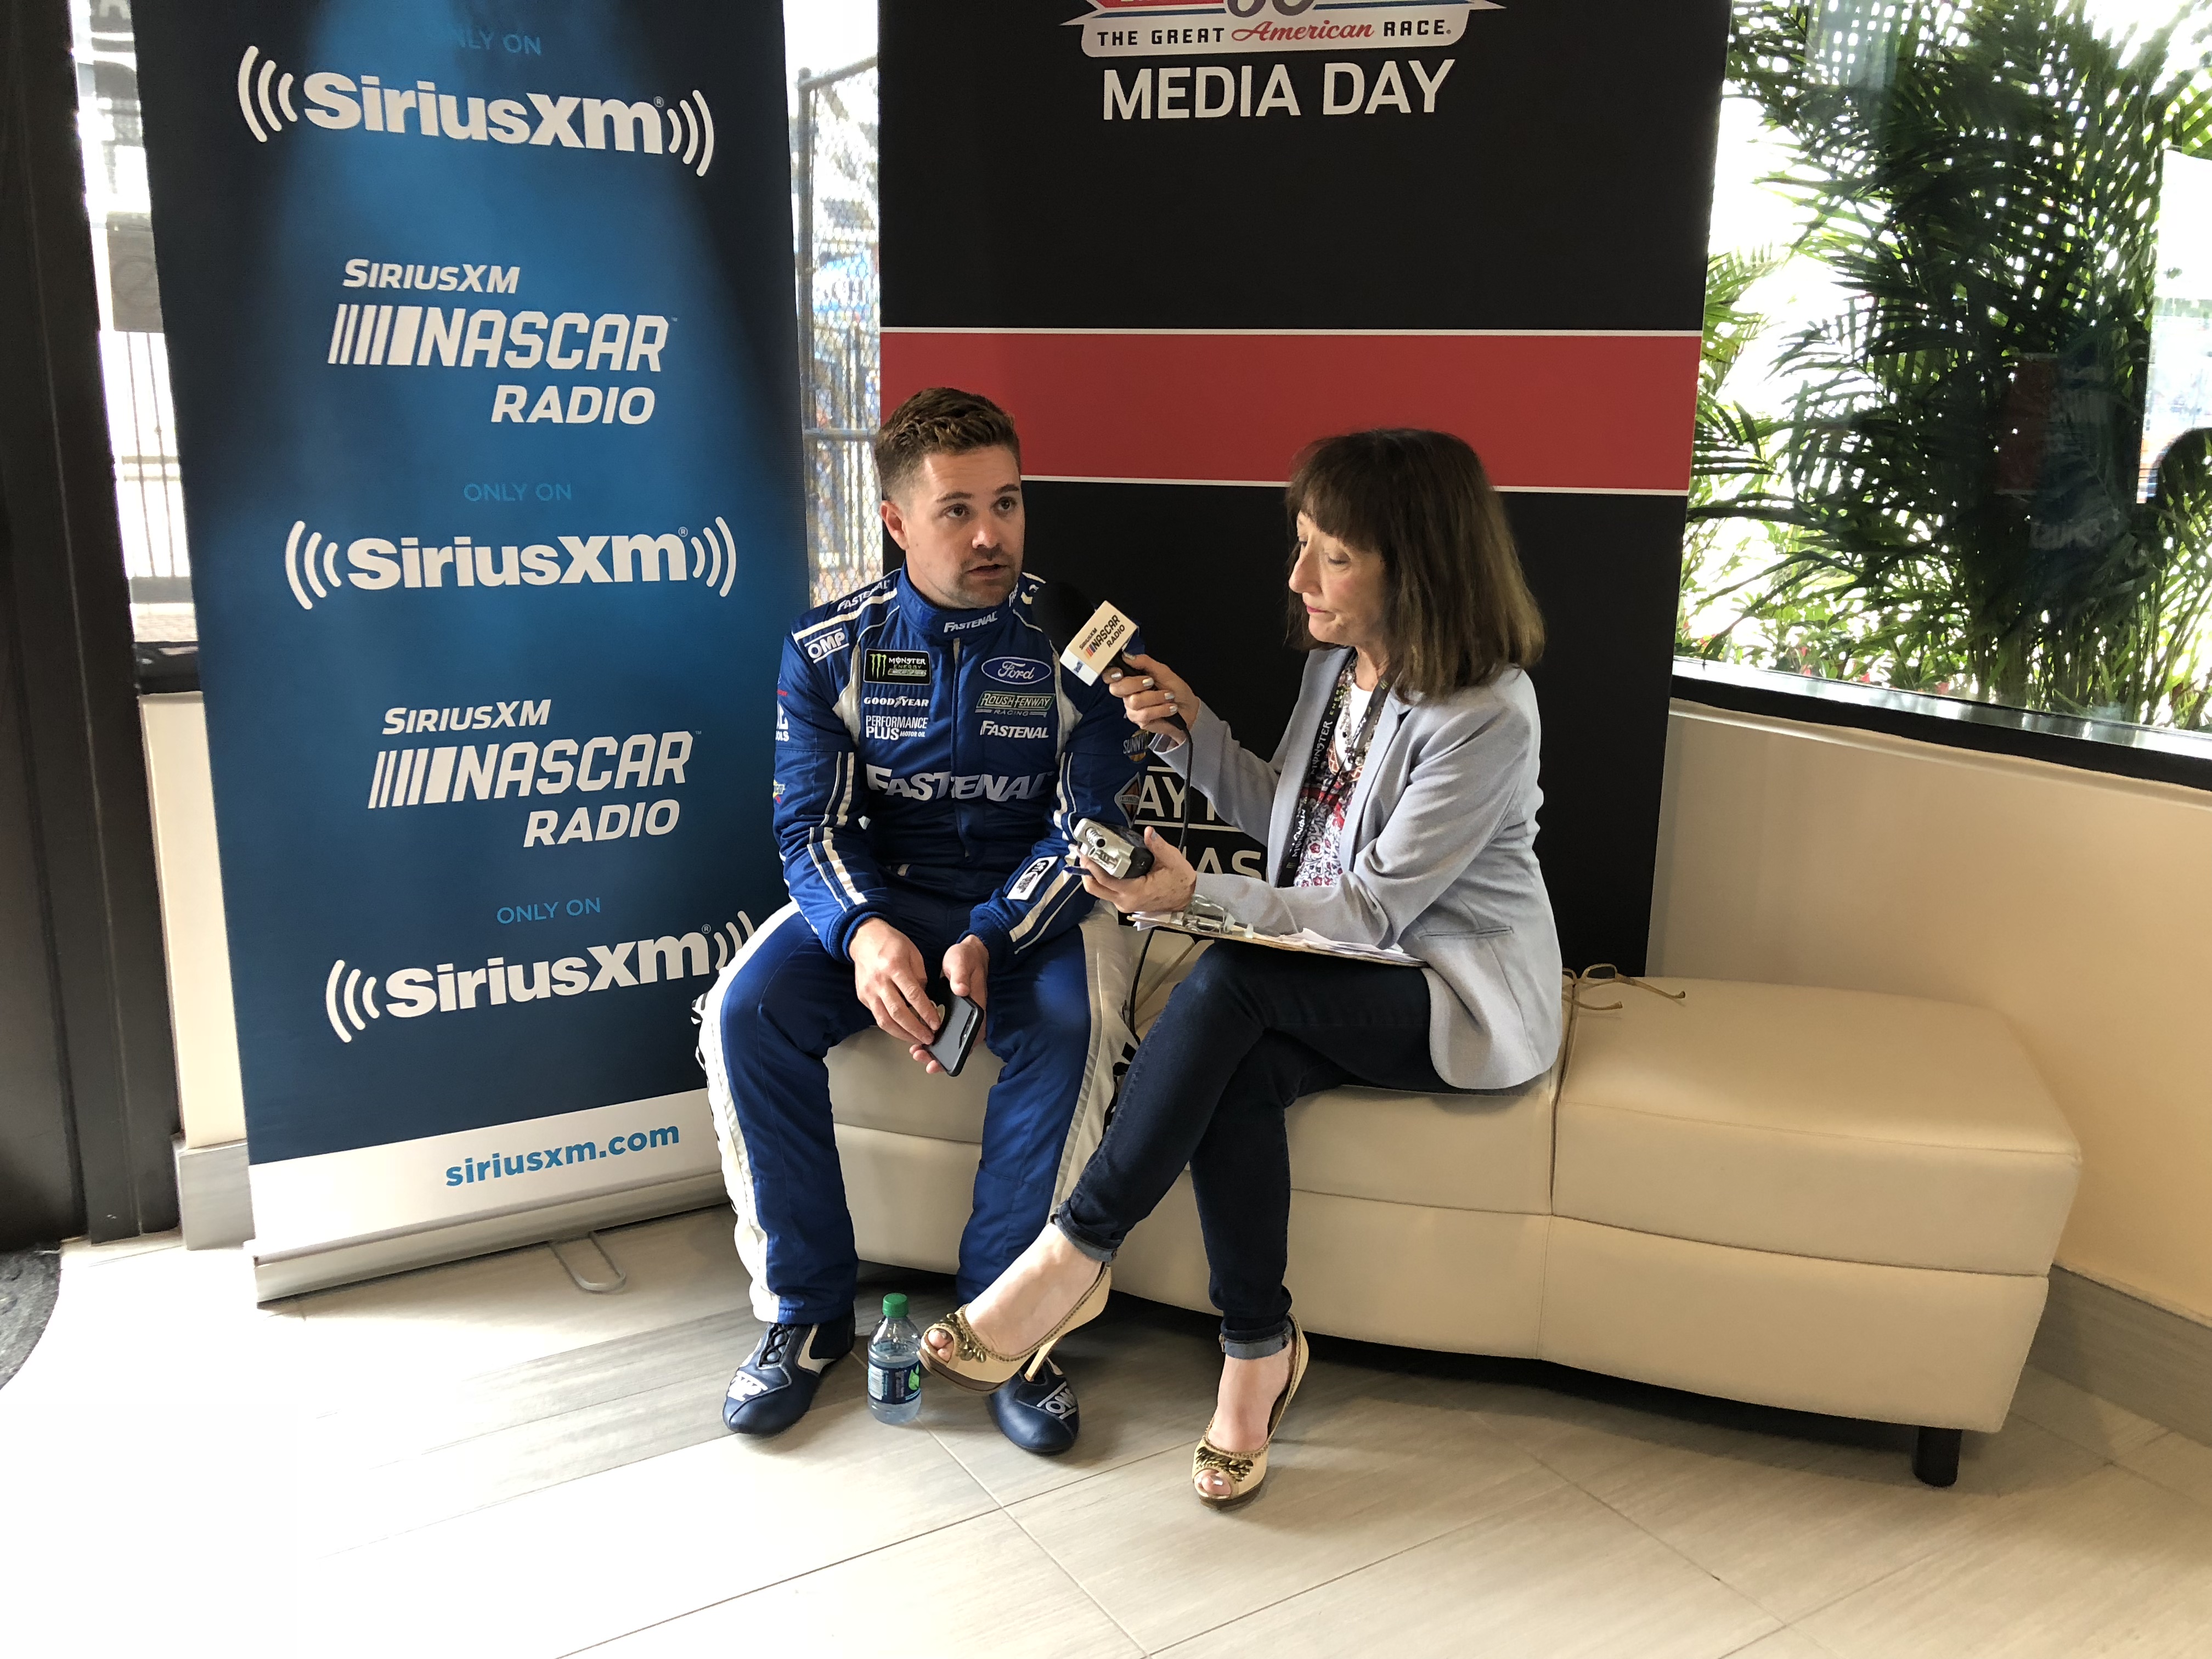 Stenhouse this week’s featured guest on ‘Jack’s Garage’